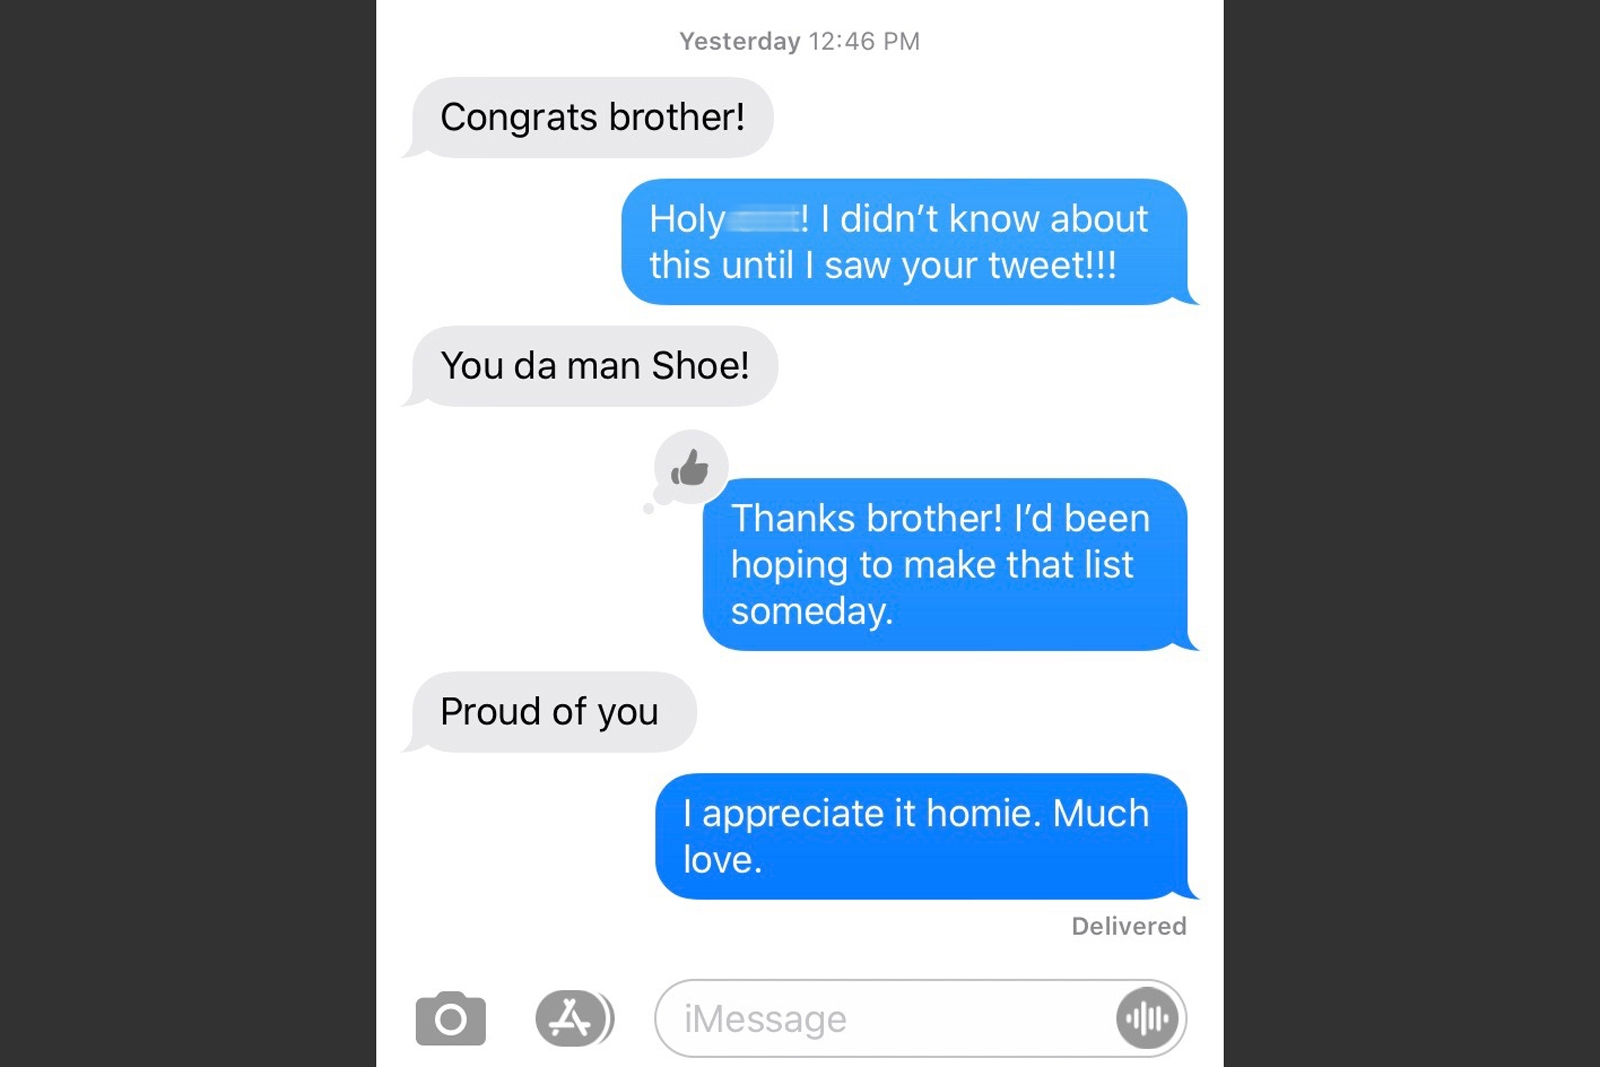 Screen grab of a text thread beginning with the words "Congrats brother!"